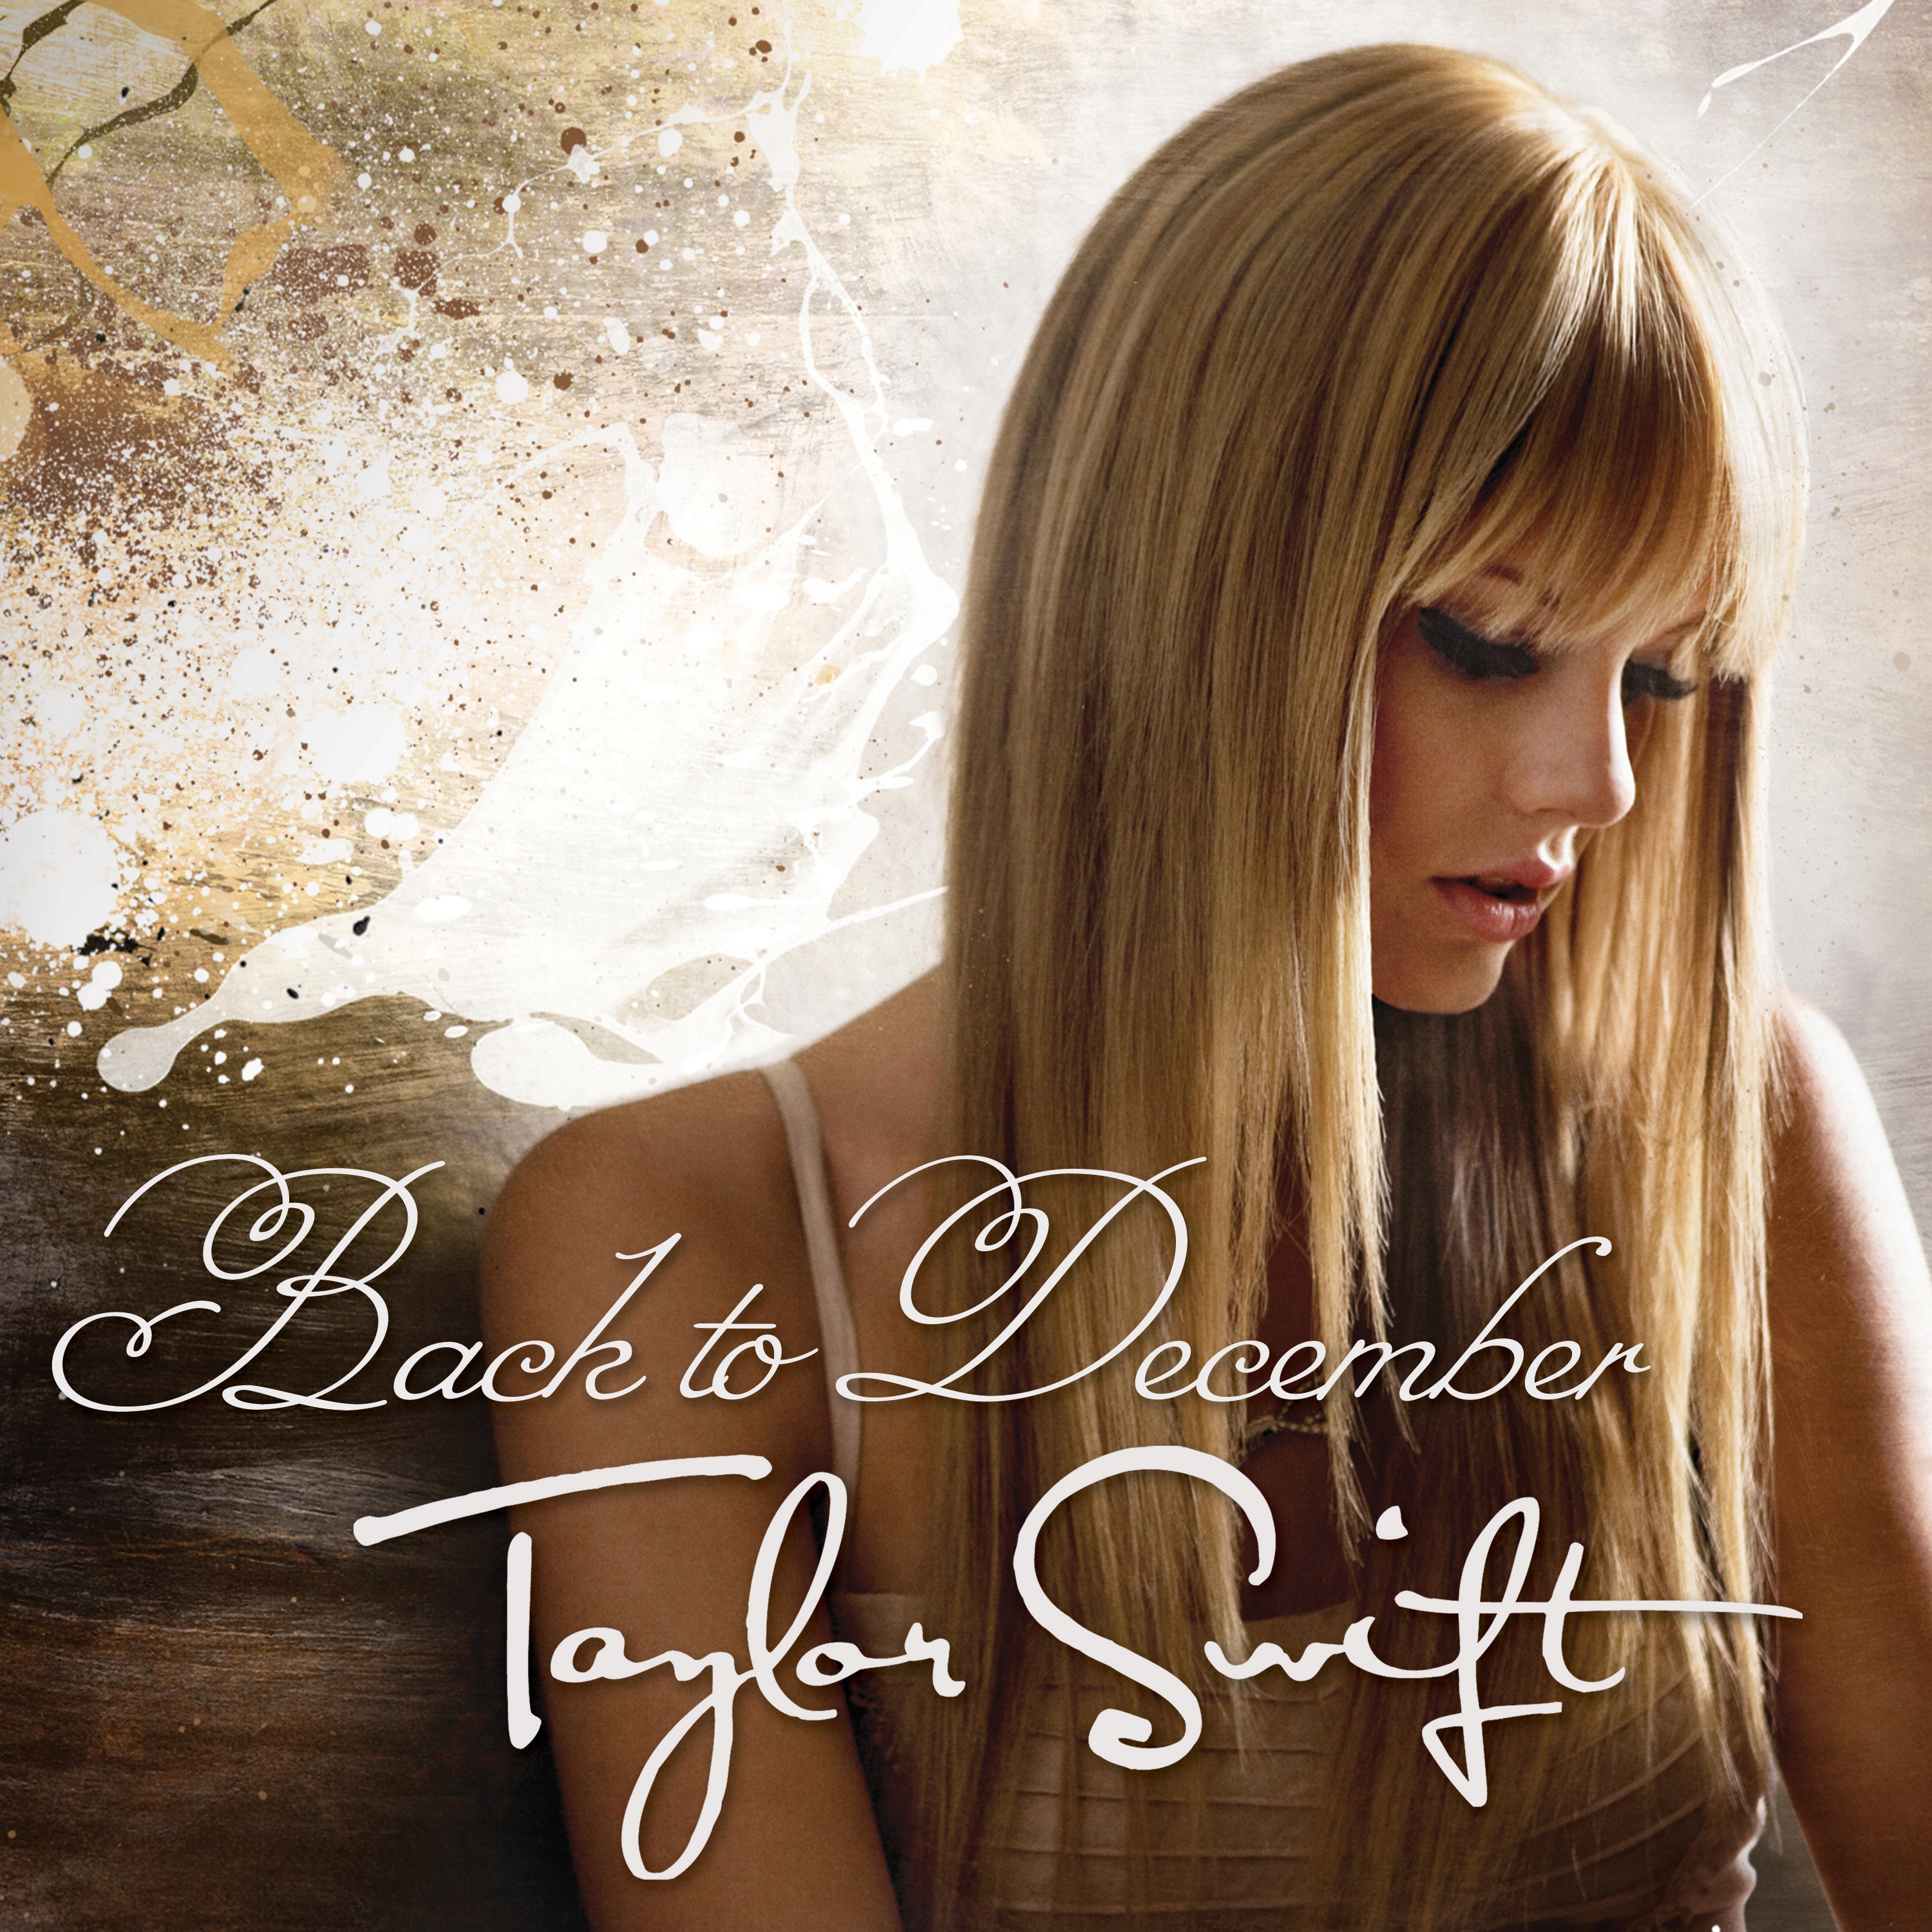 Taylor's Songs, Taylor Swift Wiki